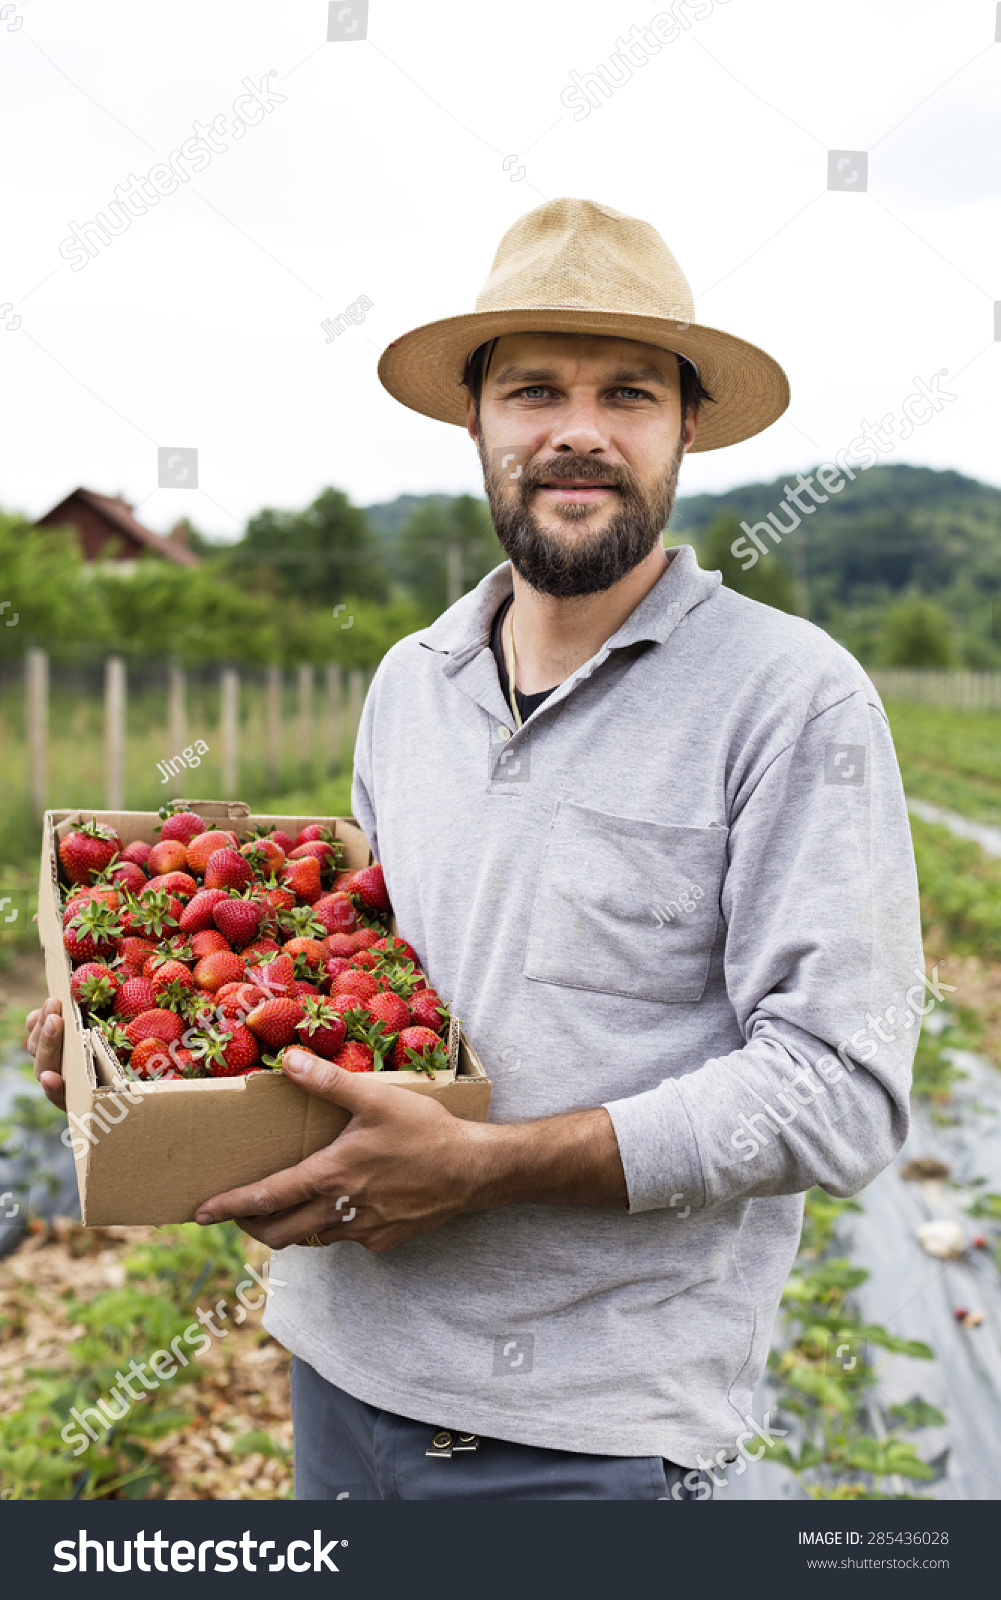 Portrait of young farmer in strawberry field holding a cardboard box full with fresh red strawberries #285436028